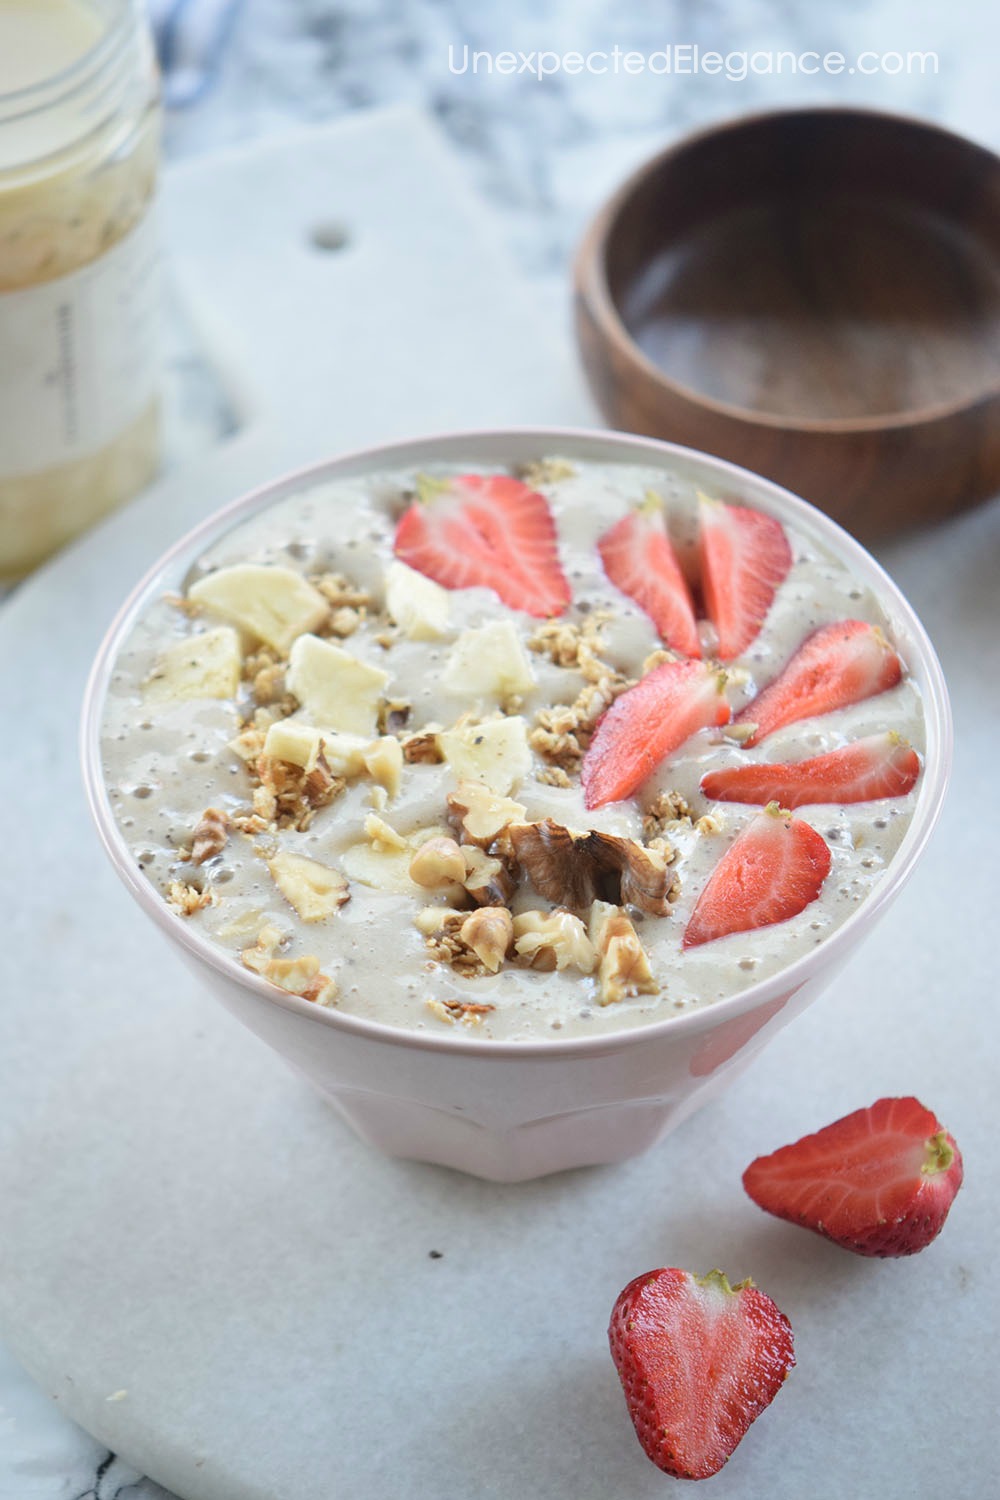 Do you love smoothies? Have you tried a smoothie bowl?? This Strawberry Banana Smoothie Bowl is delicious and will leave you feeling full.